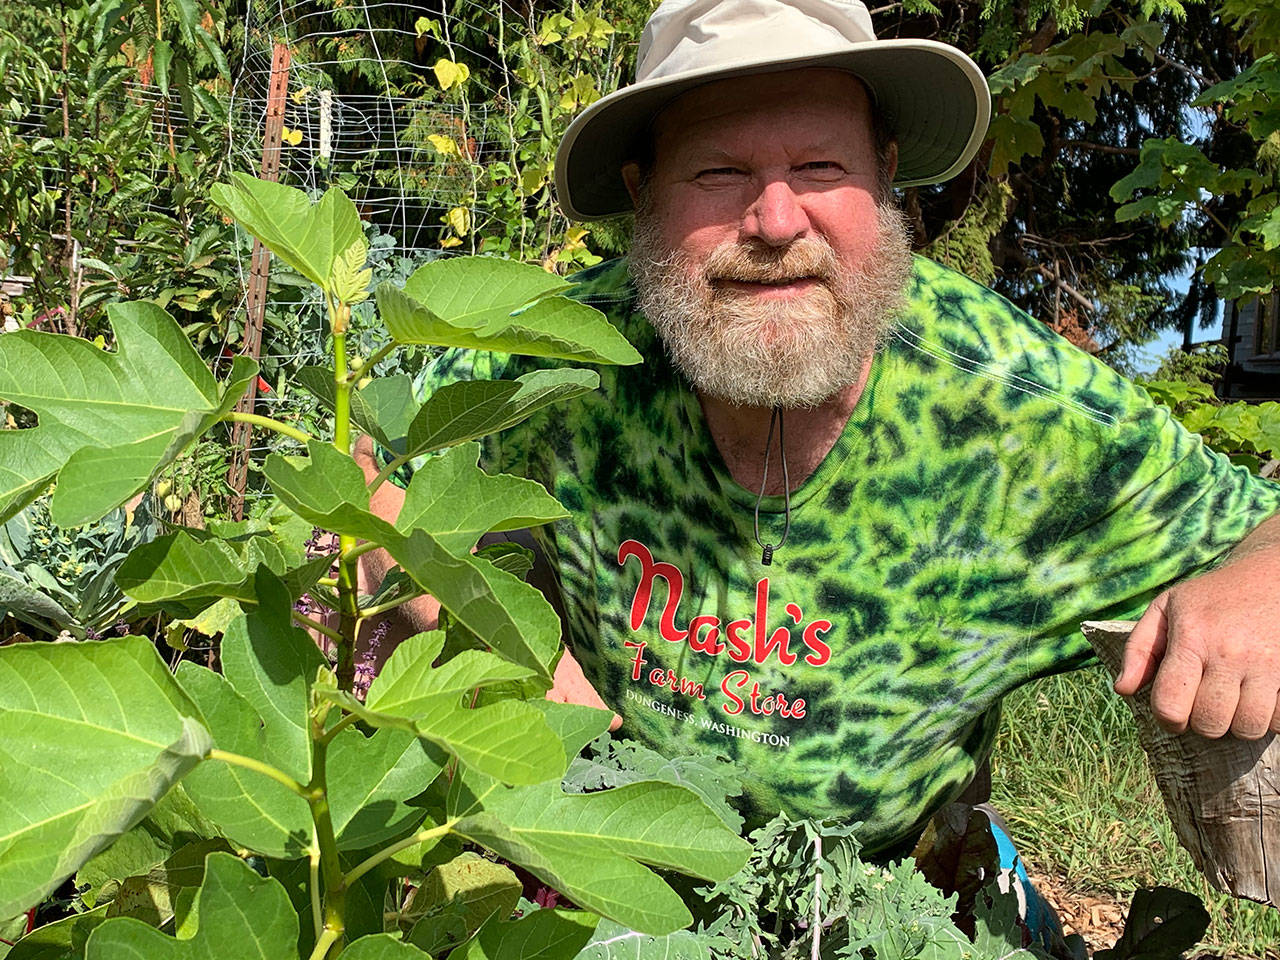 Paul Kolesnikoff discusses growing figs on the North Olympic Peninsula at a Zoom presentation set for noon-1 p.m. on Thursday, Oct. 8. Photo courtesy of Paul Kolesnikoff